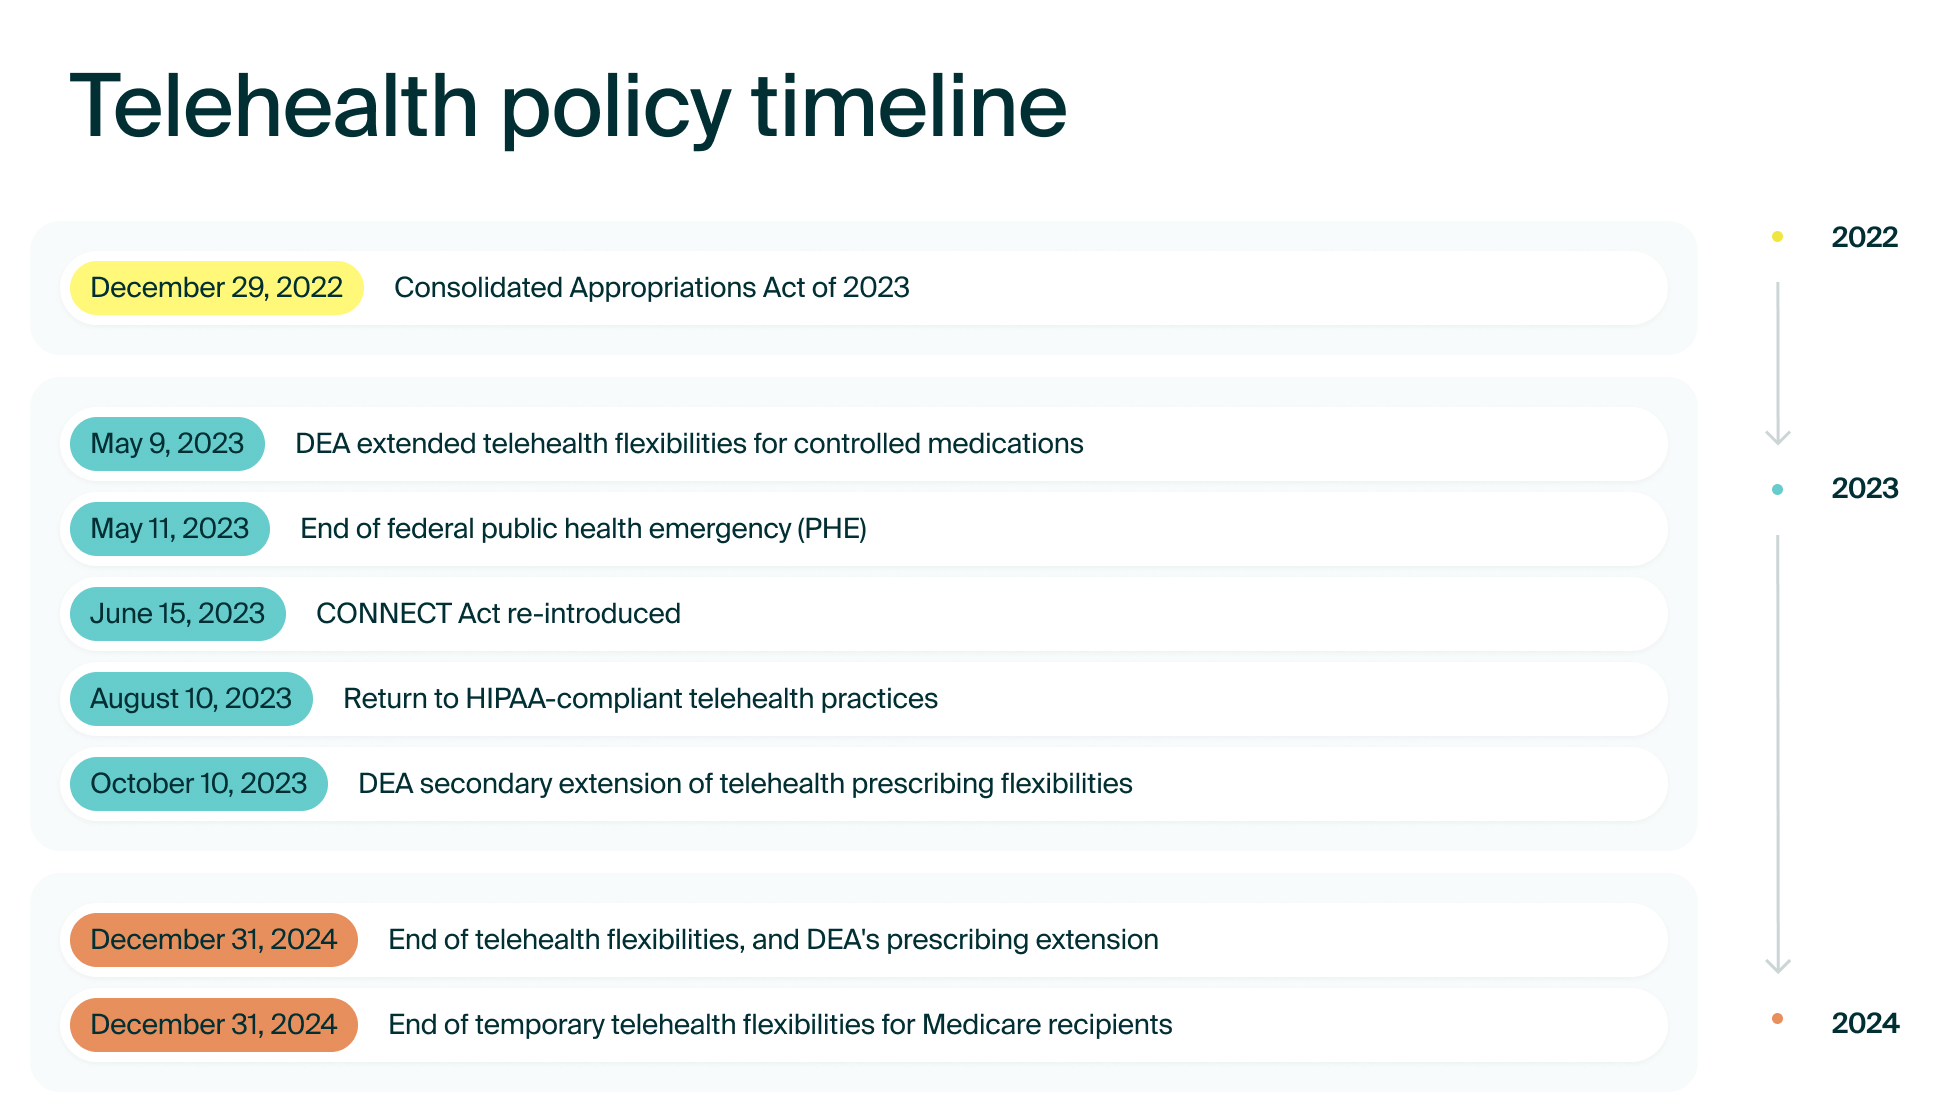 Telehealth policy timeline from 2022 to 2024